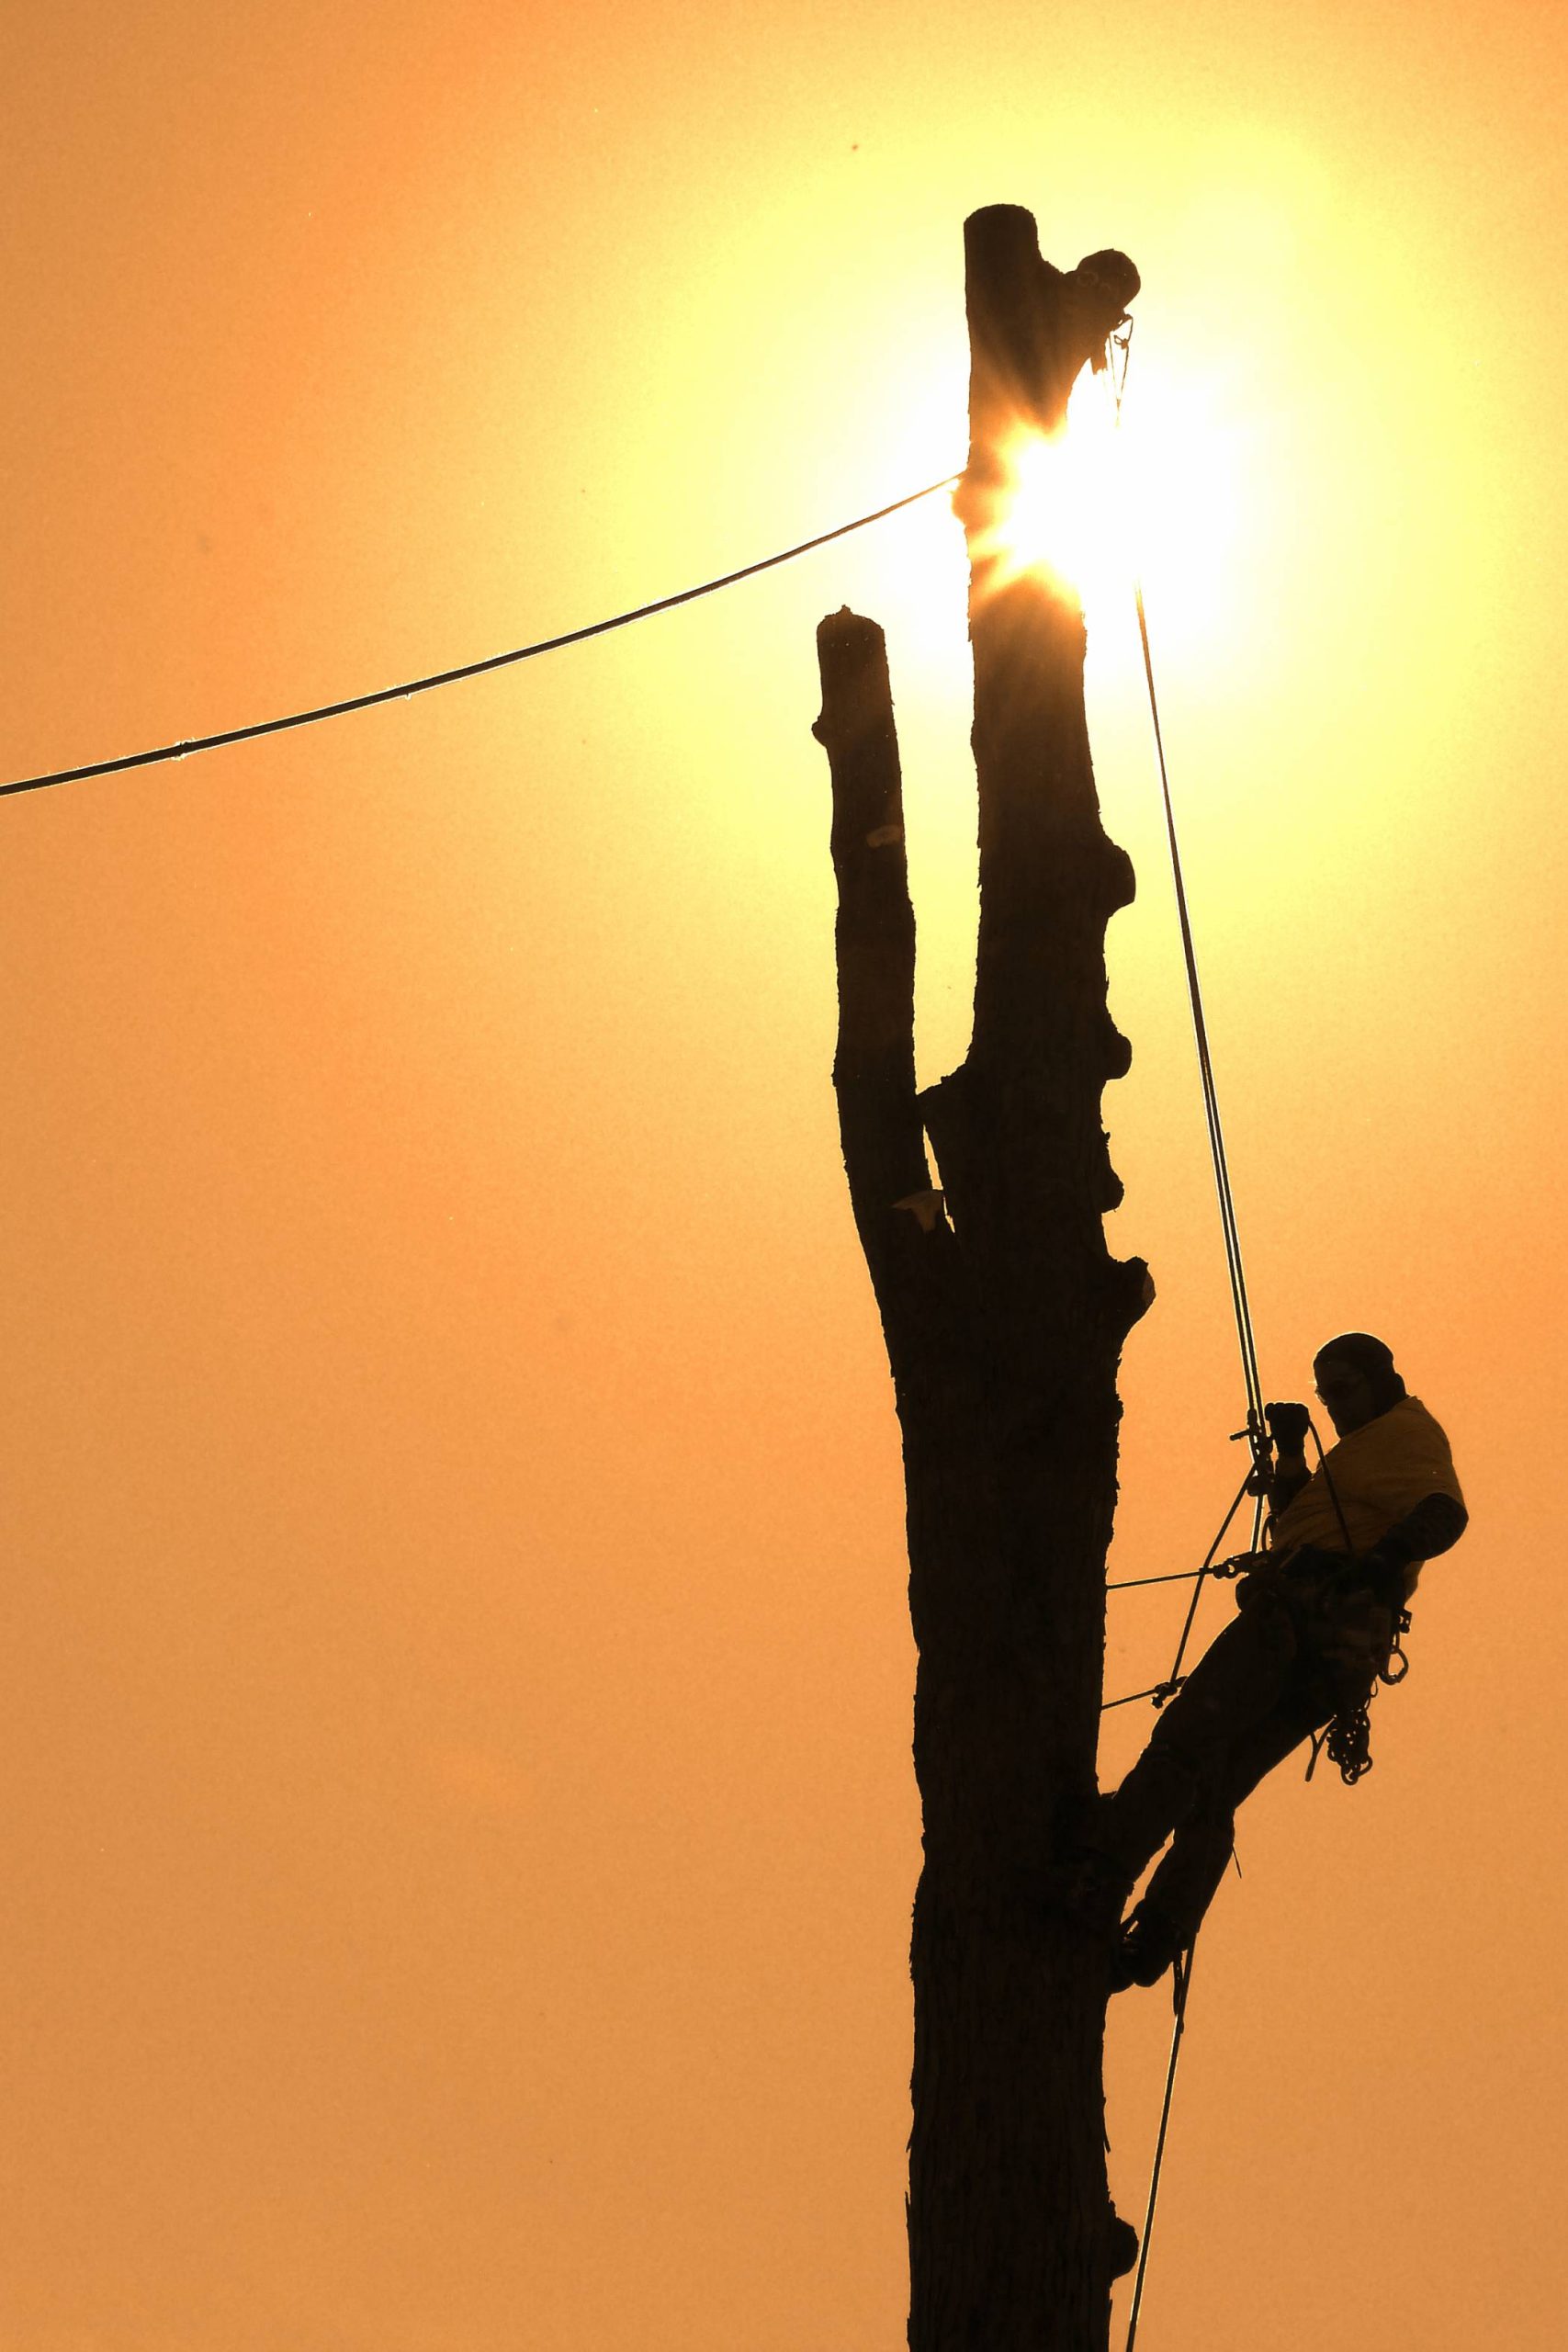 Silhouette of a man cabled to a tree as he works to remove it with the sun in the background.